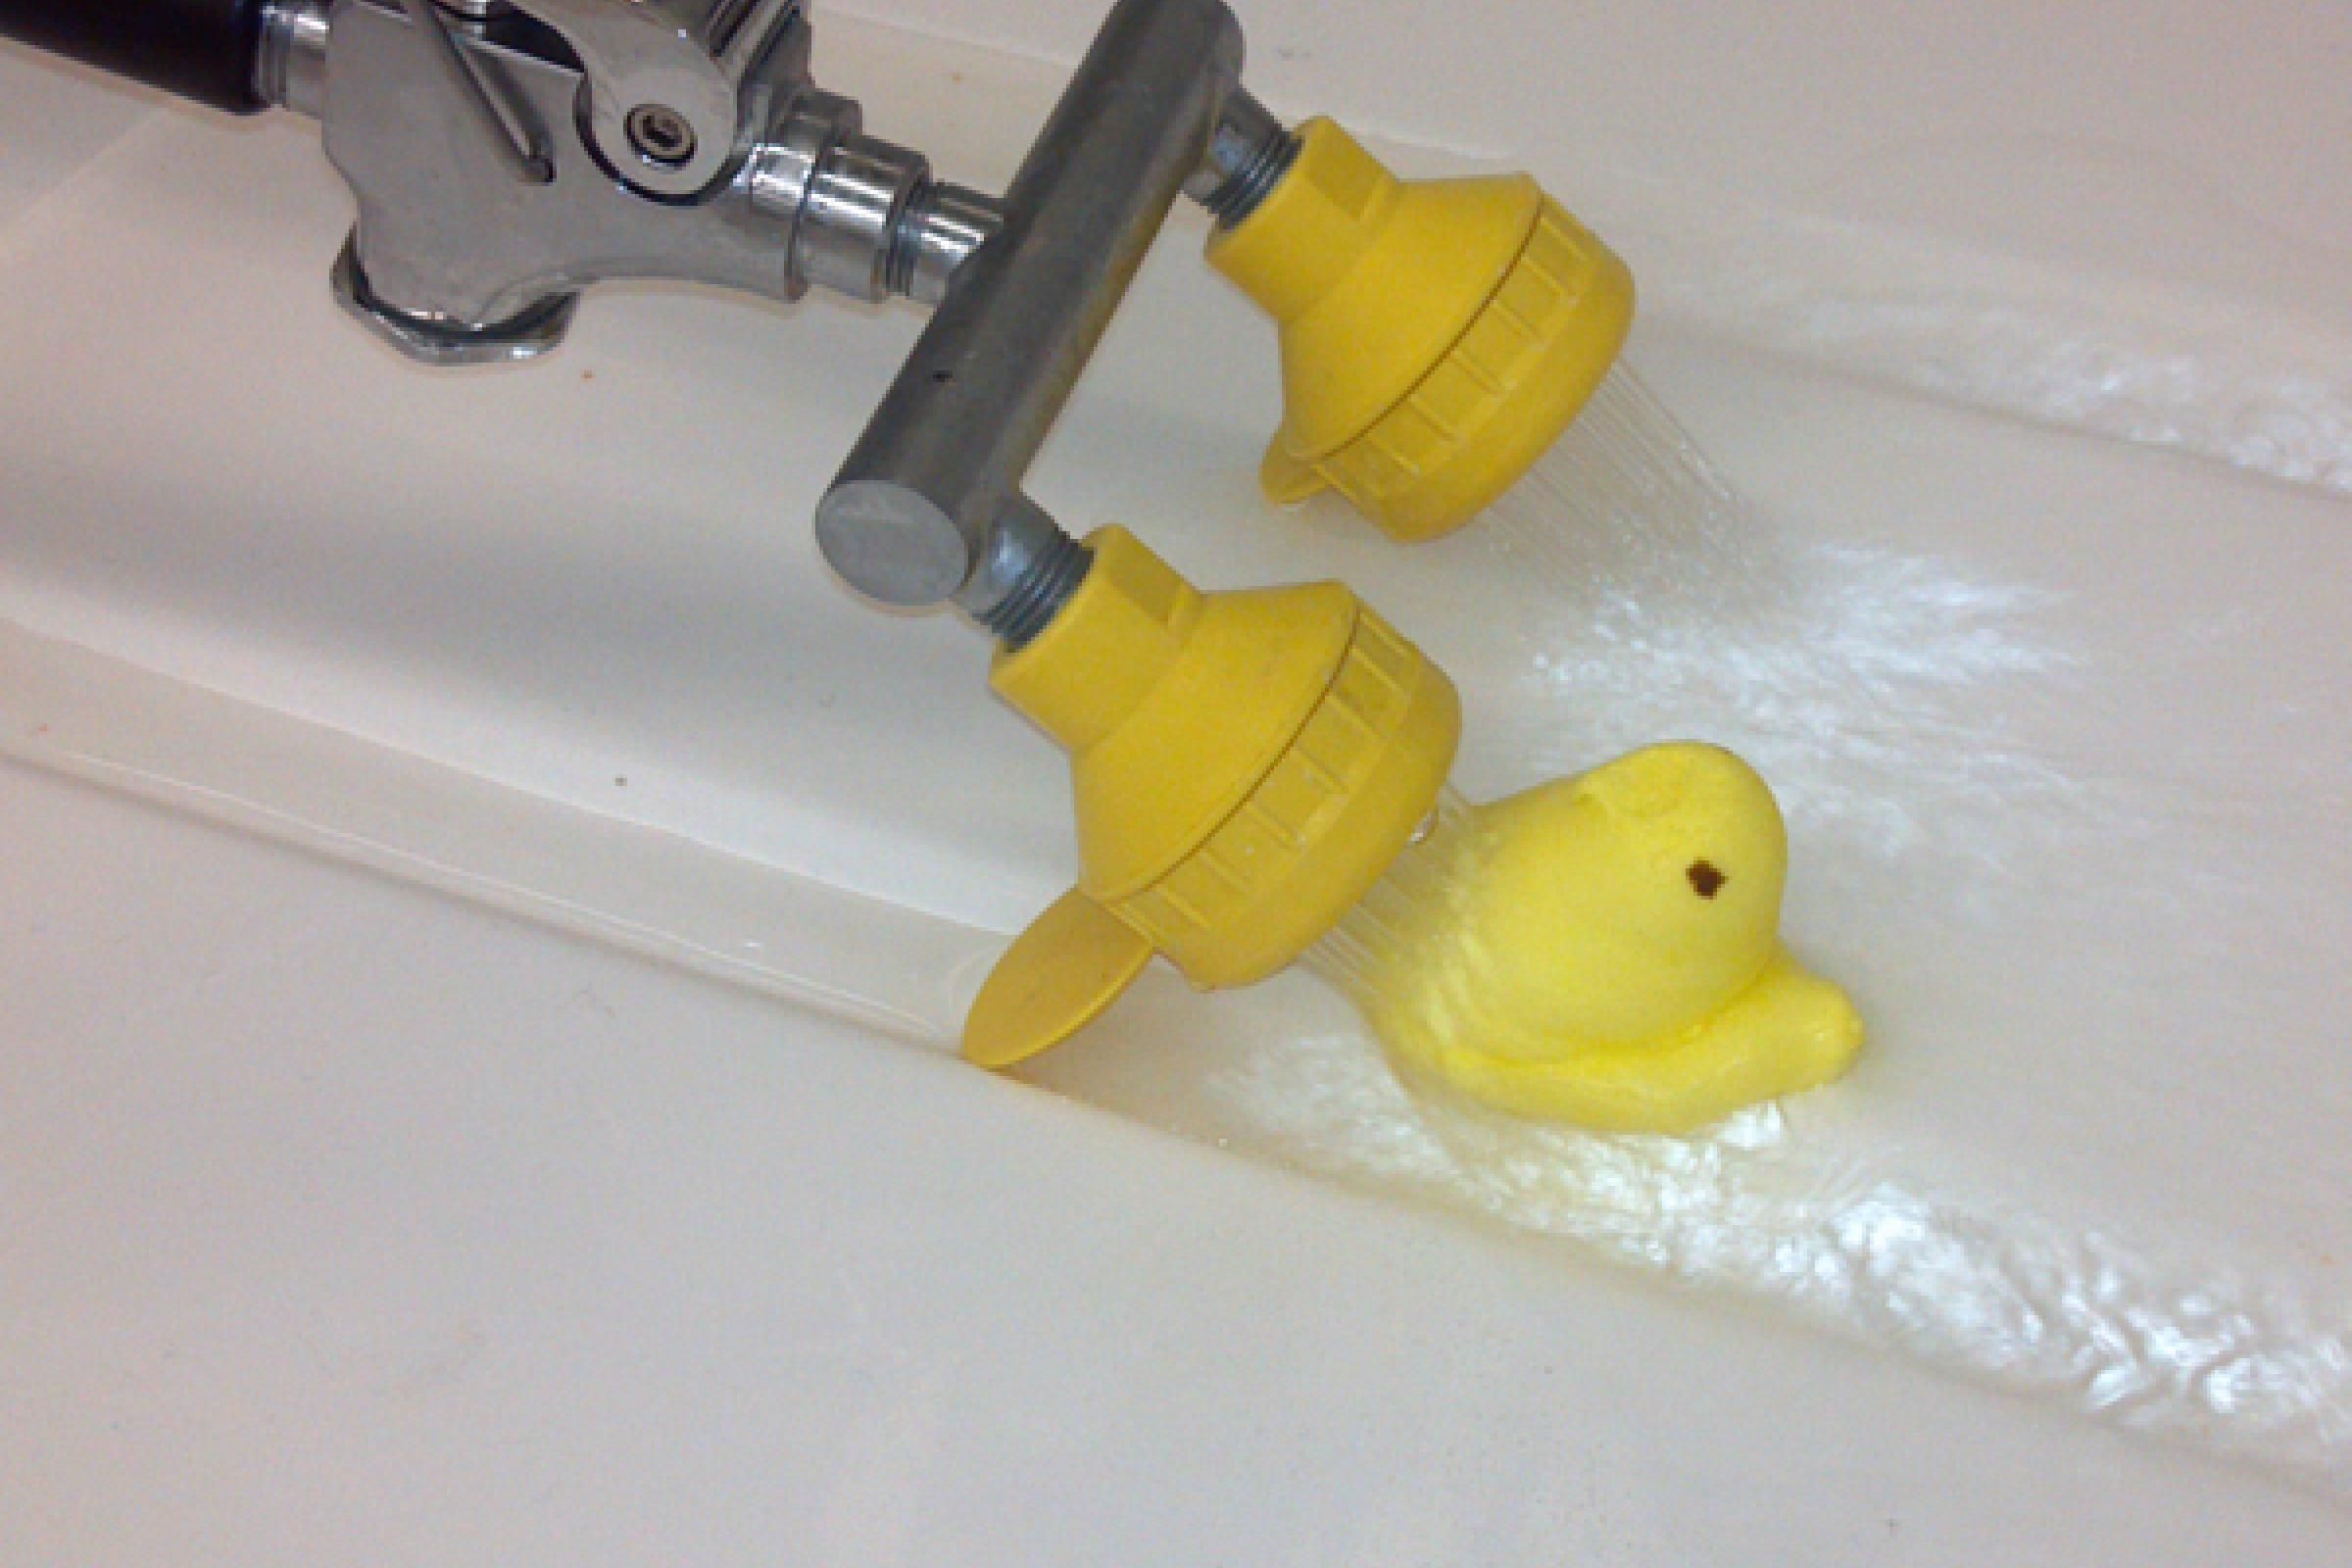 One peep was squealing with delight ... until he dissolved.